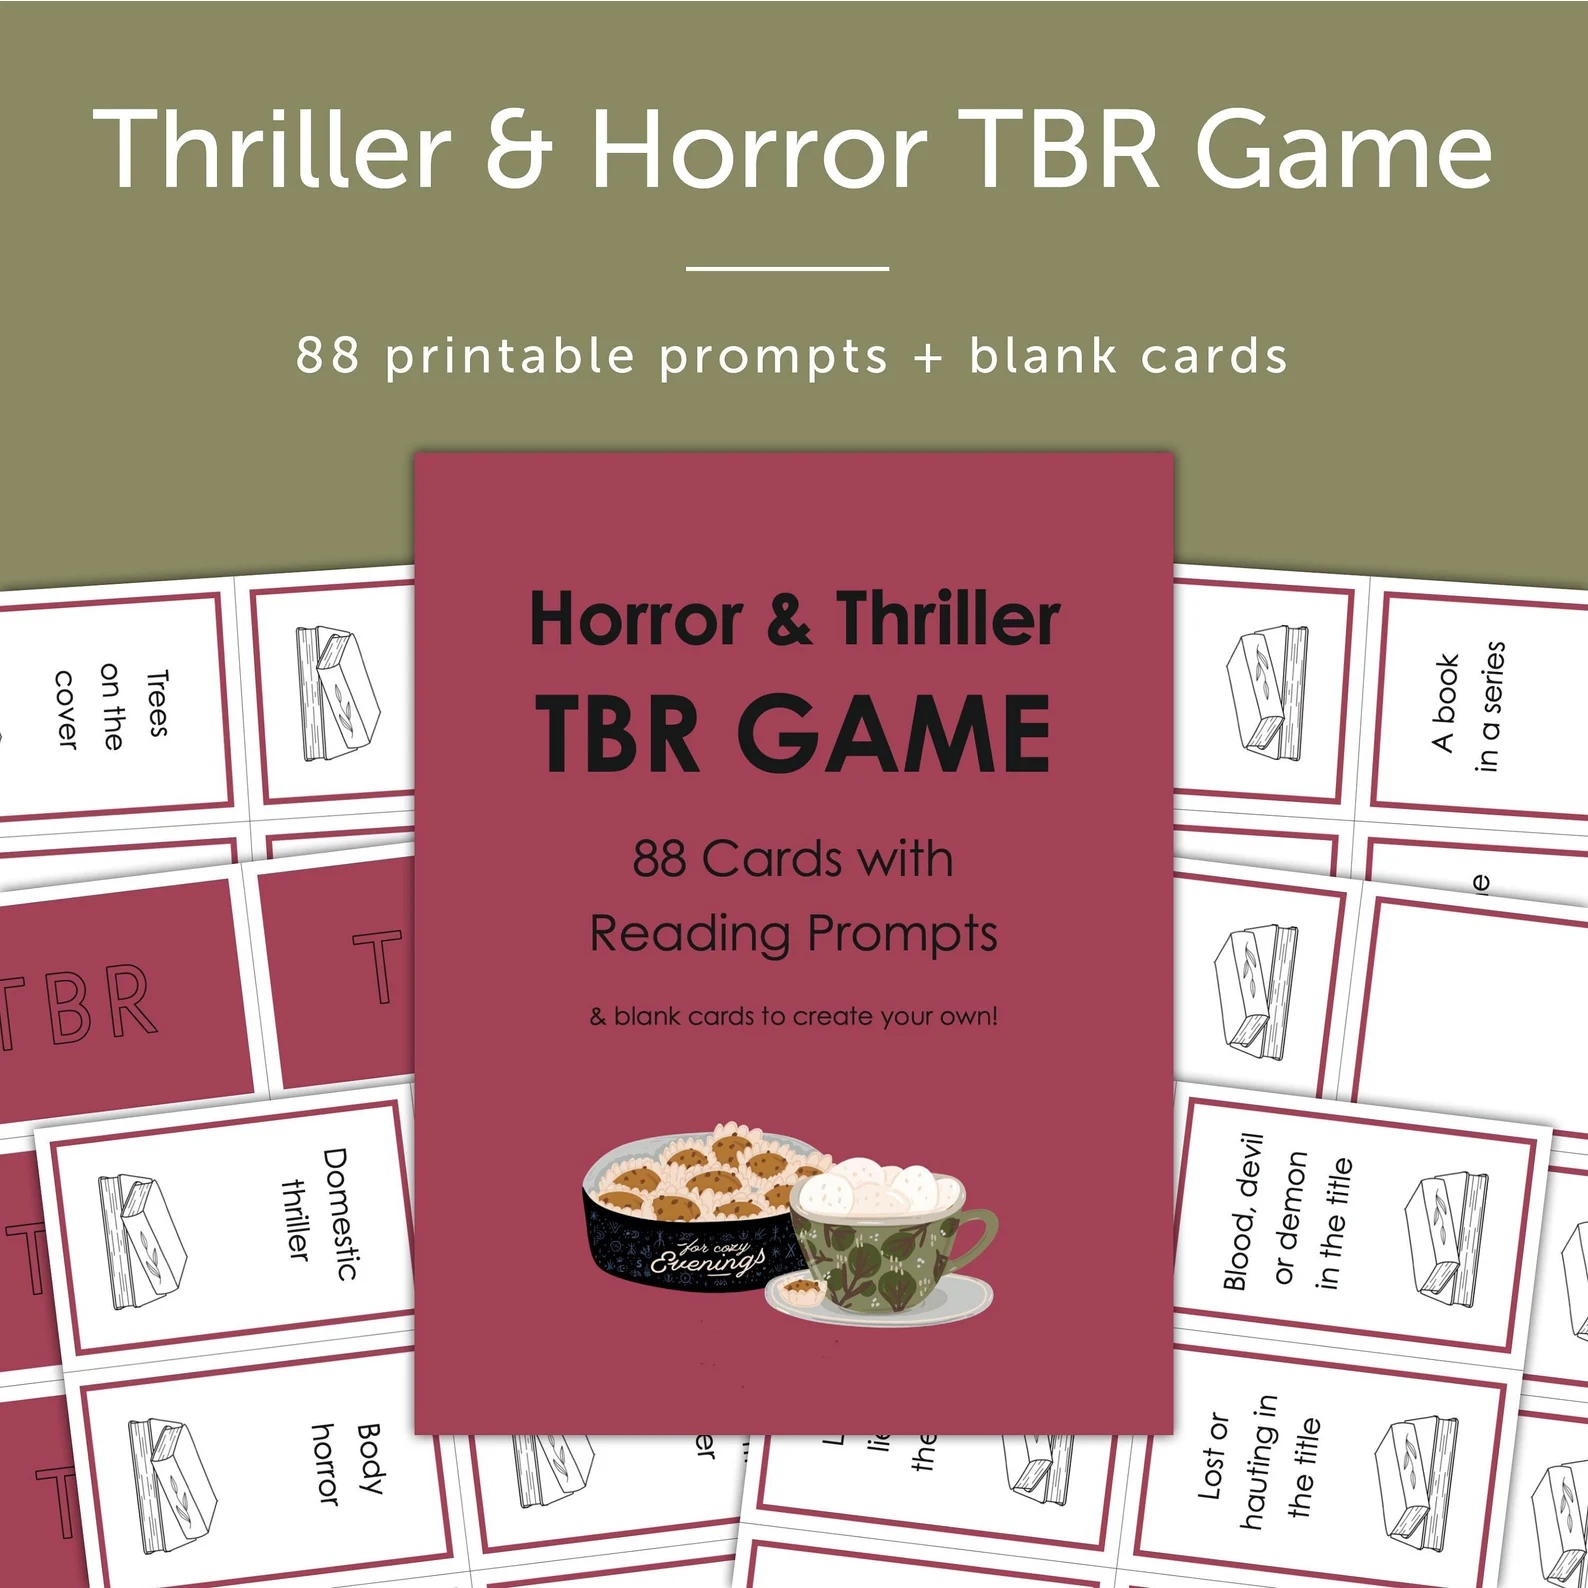 Image of the thriller and horror TBR game